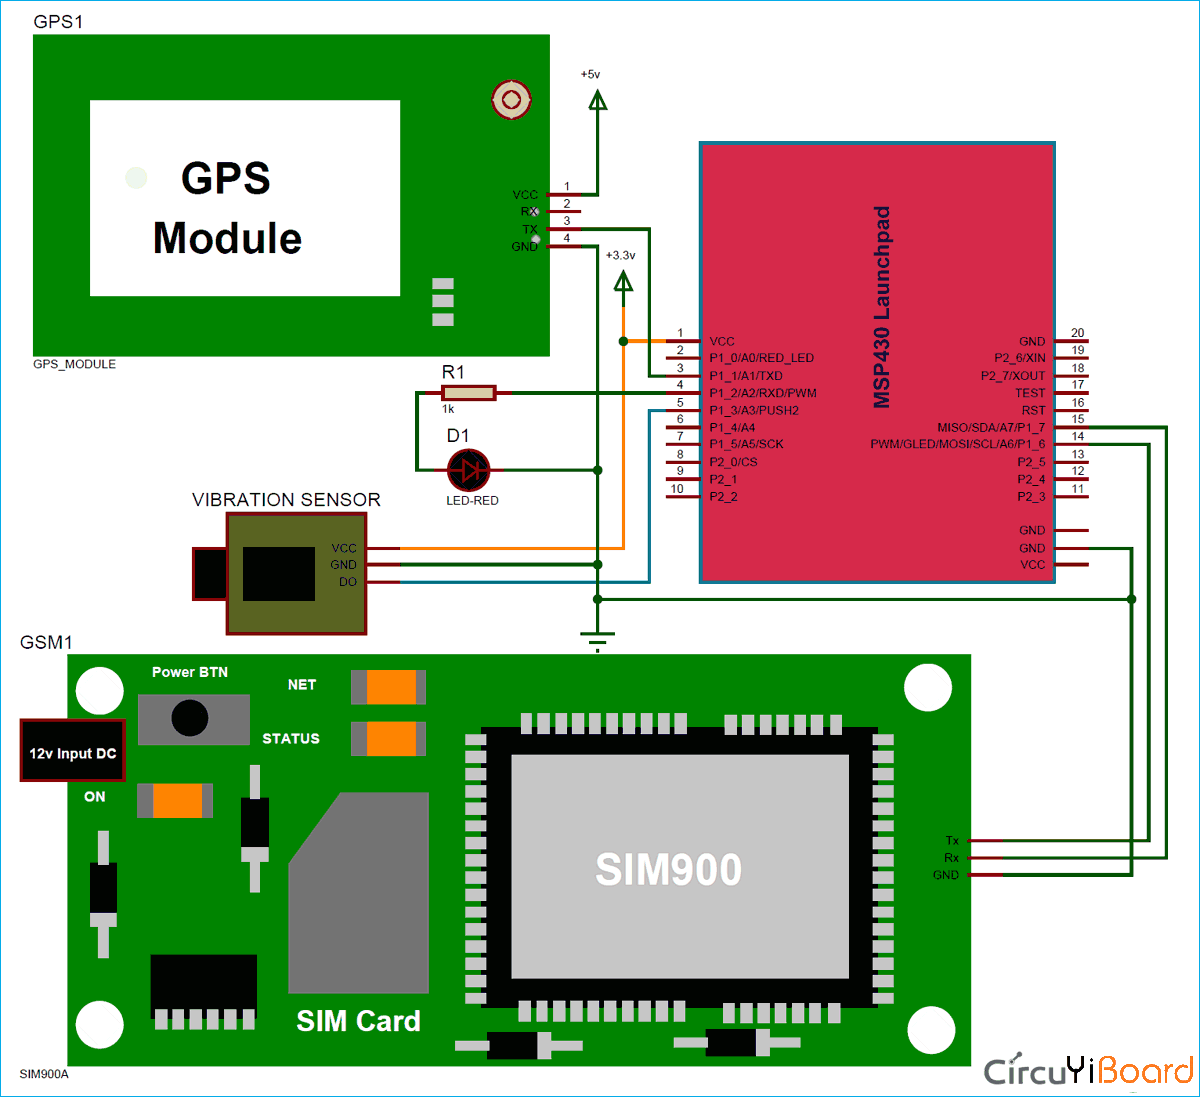 Circuit-Diagram-for-Vehicle-Tracking-and-Accident-Alert-System-using-MSP430-and-GPS.png